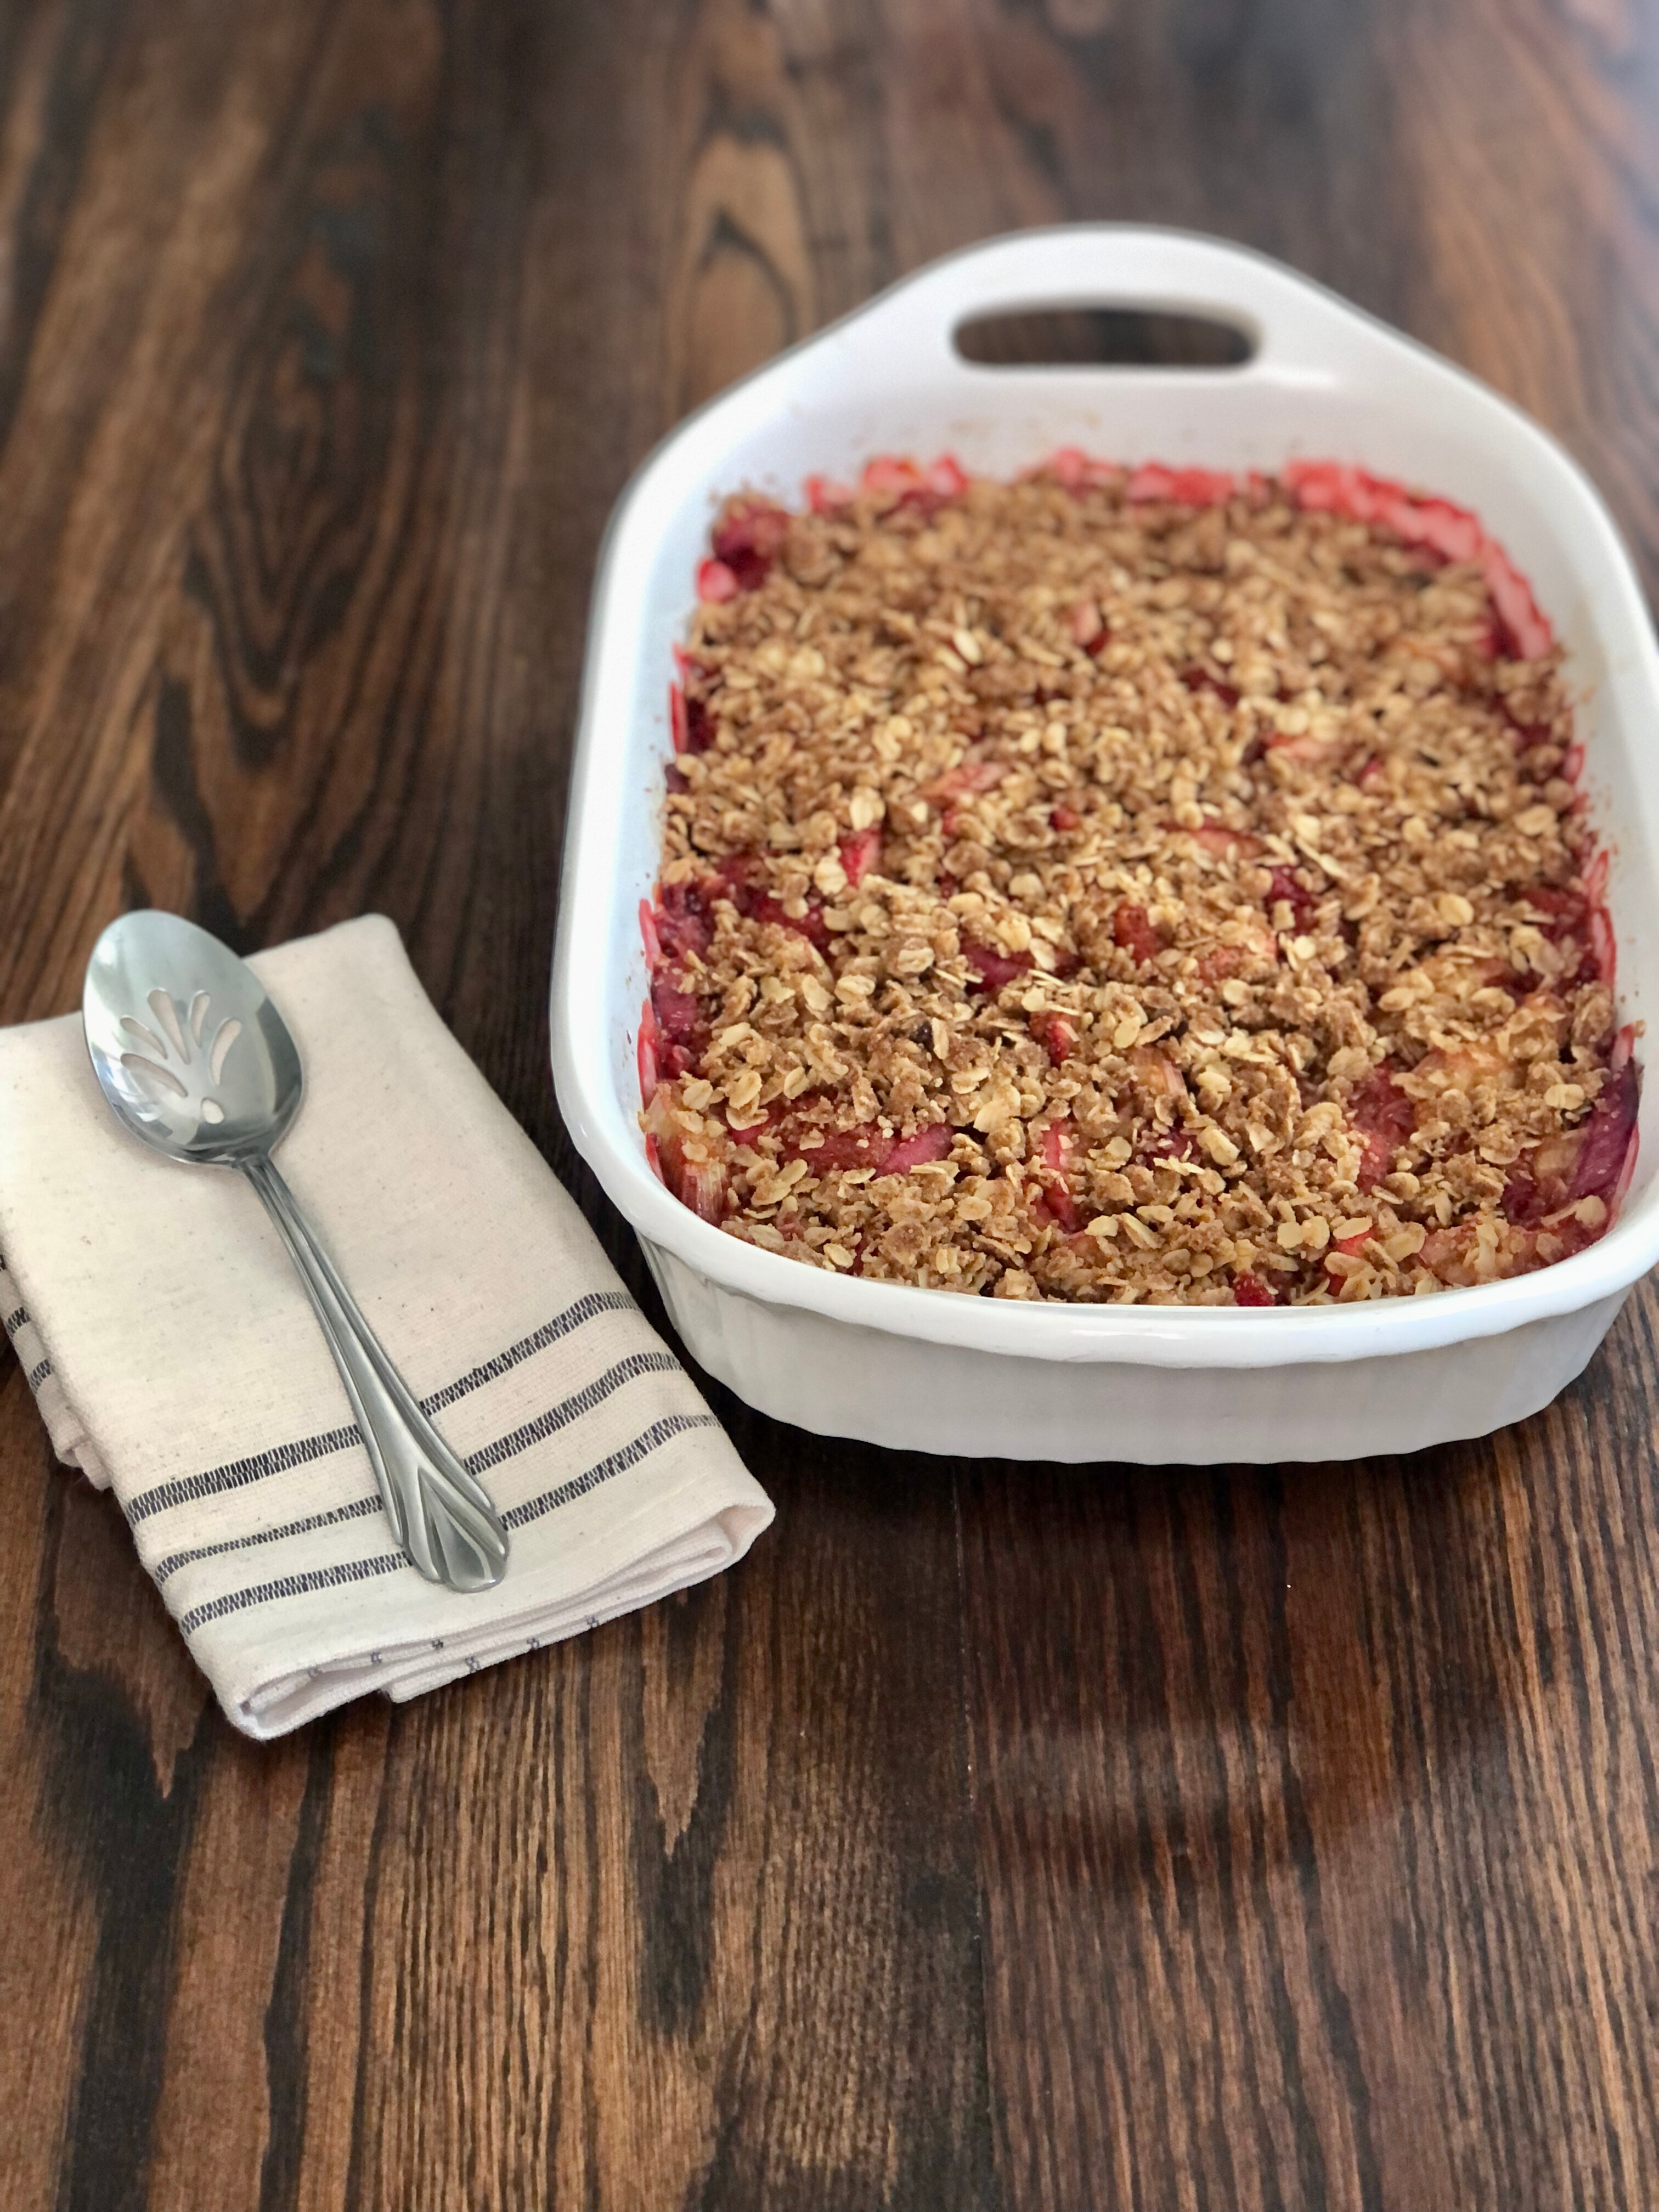 Baked Strawberry Rhubarb Crumble in white casserole dish on dark wood table with serving spoon on a cloth napkin.